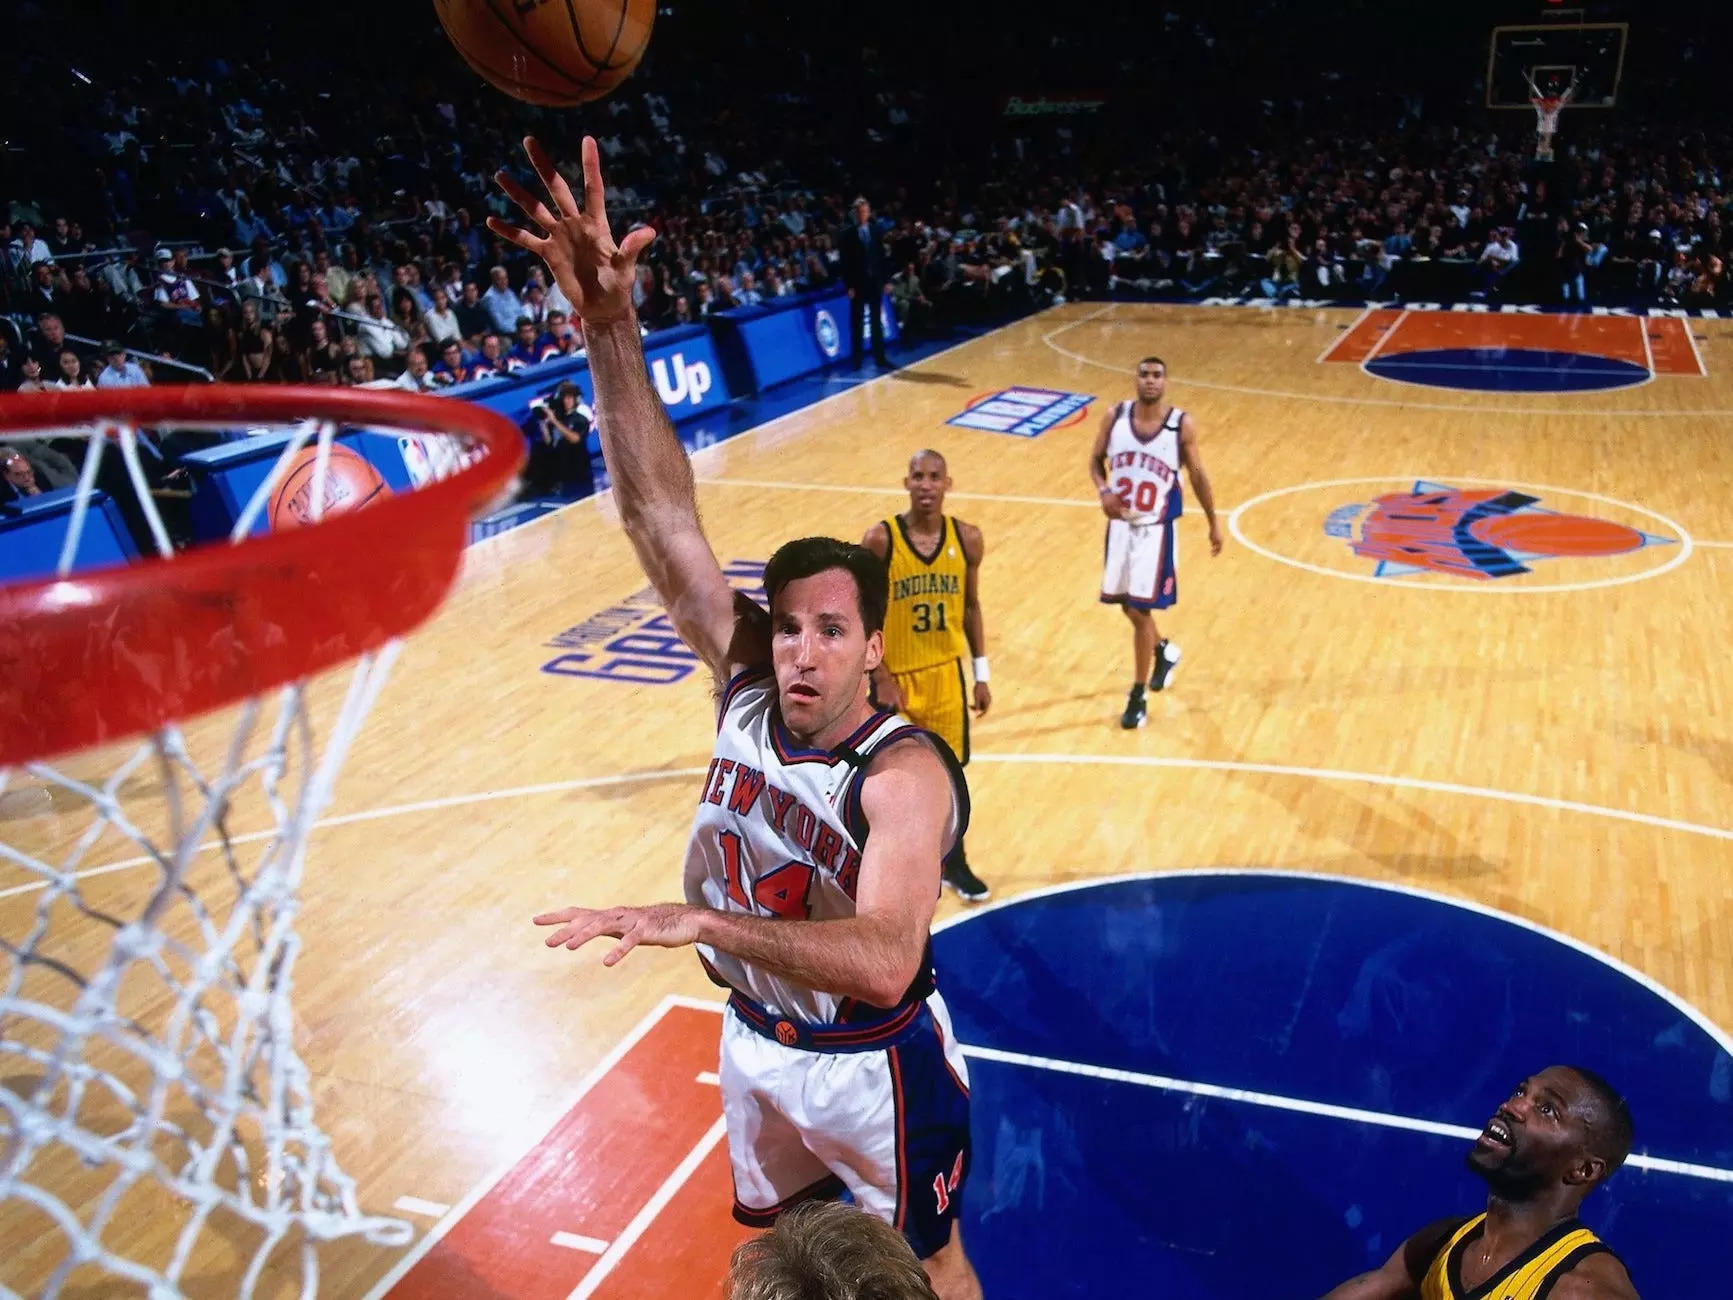 Chris Dudley shoots a shot over a defender during the 1999 NBA playoffs.